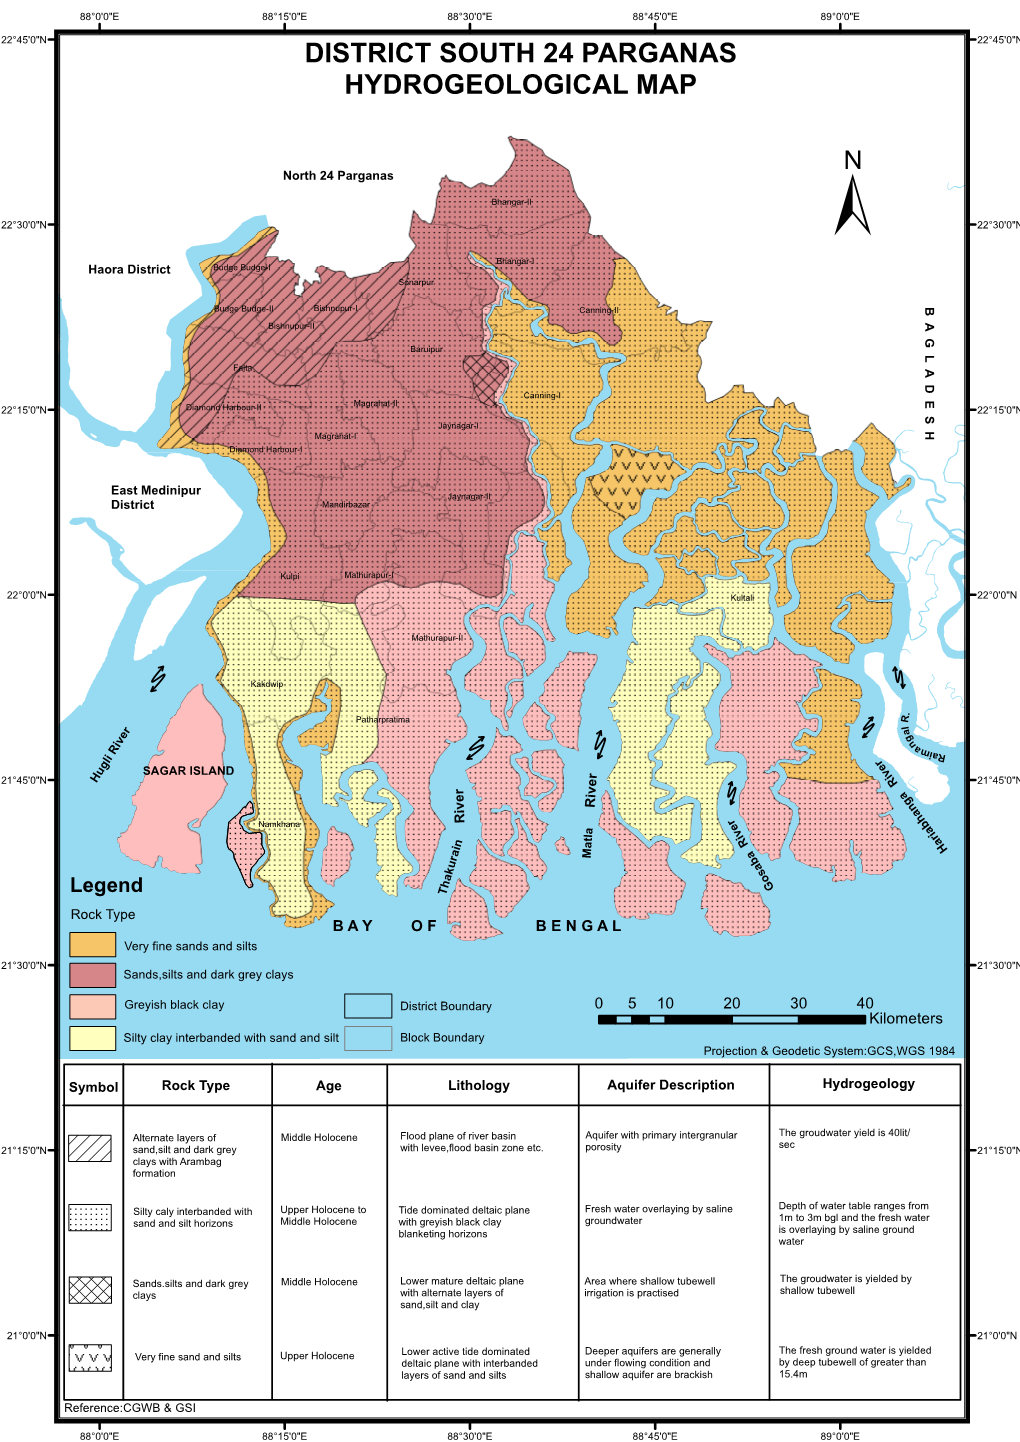 District South 24 Parganas Hydrogeological Map